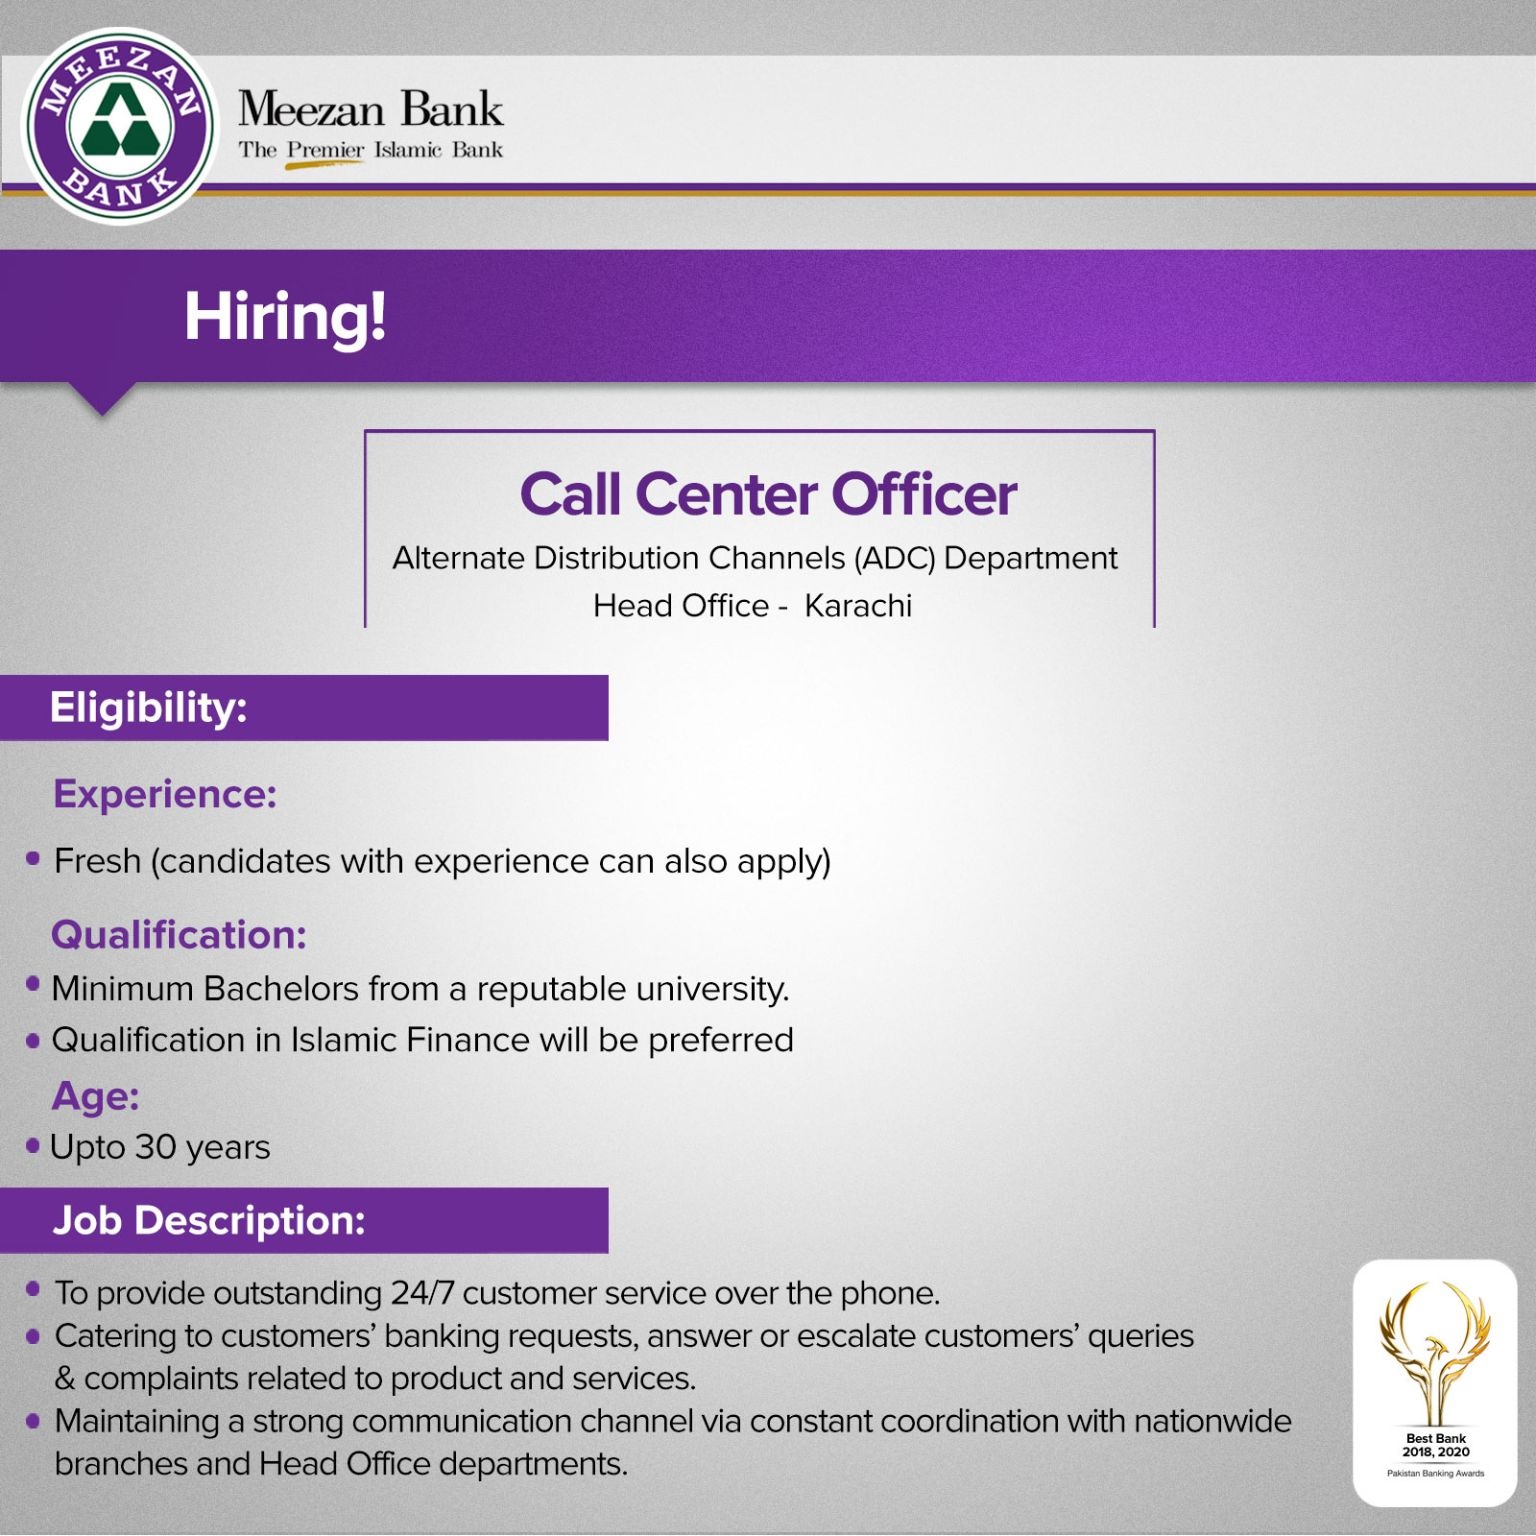 Meezan Bank is looking to hire Call Center Officer